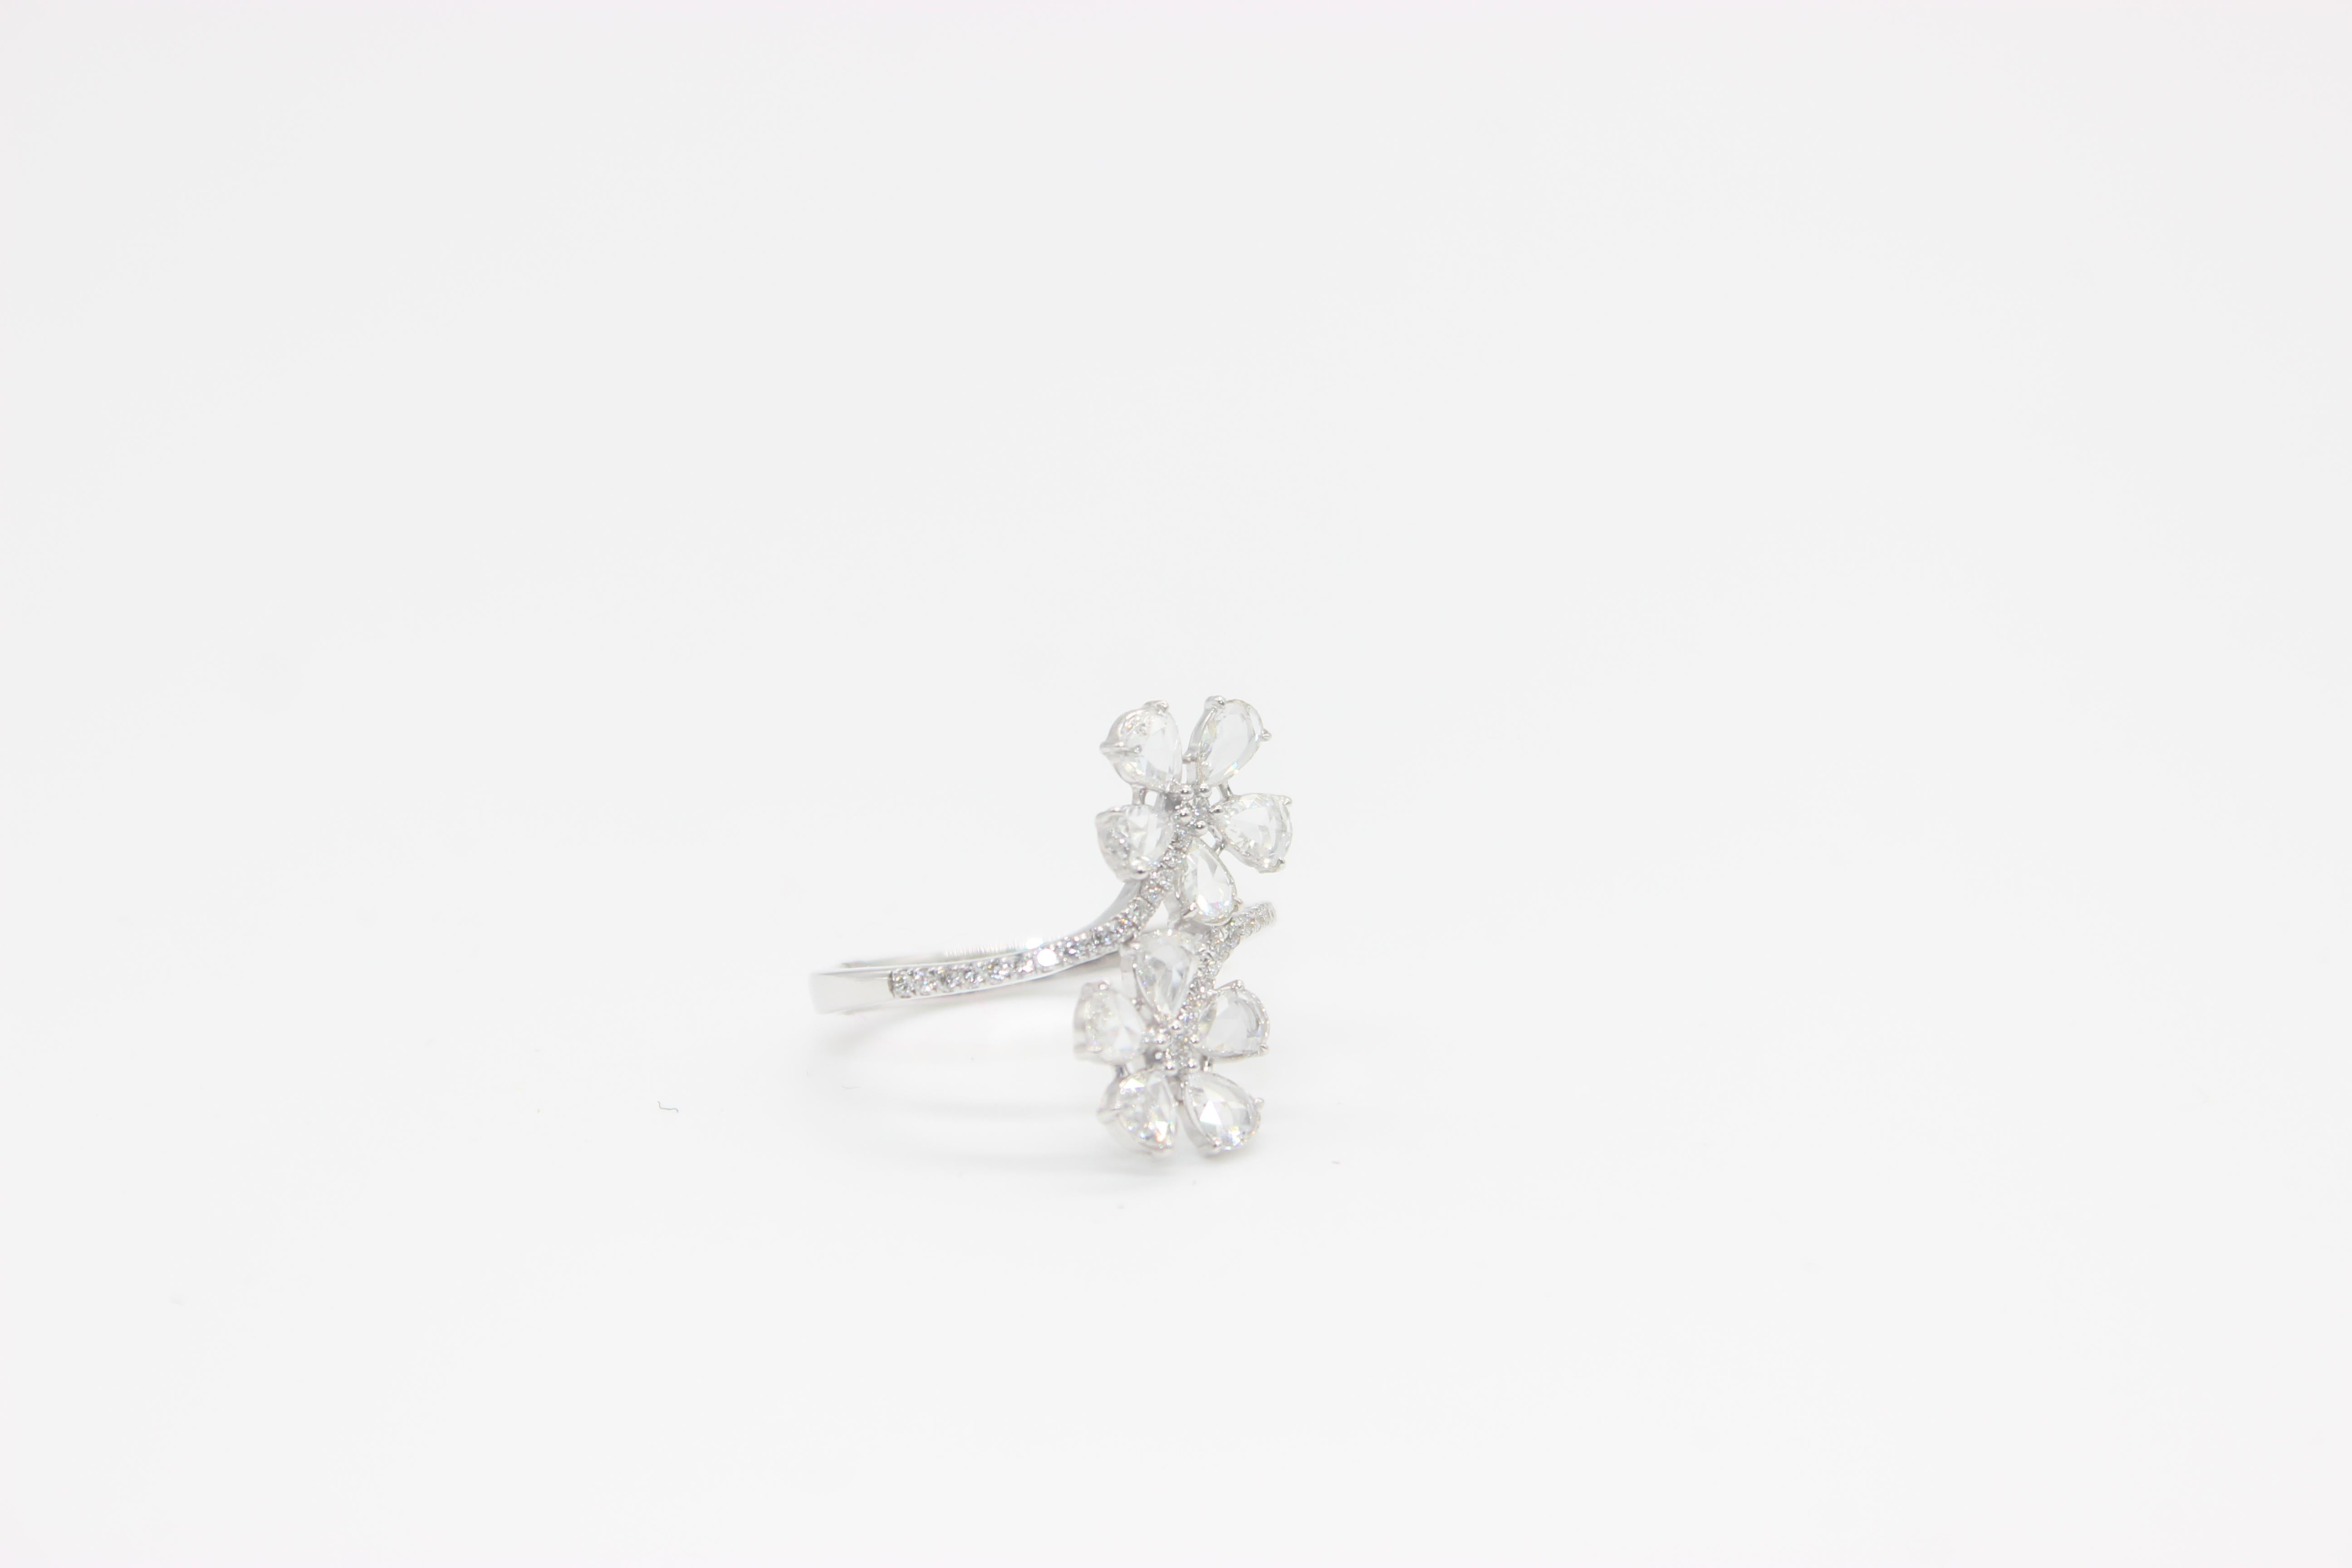 PANIM 1 Carat Diamond Rosecut Floral 18K White Gold Ring

A lovely 18k Panim white gold floral ring. A round brilliant stone with a bright, even tone is put in the middle of the ring. The round brilliant is surrounded by pear-shaped rose cut